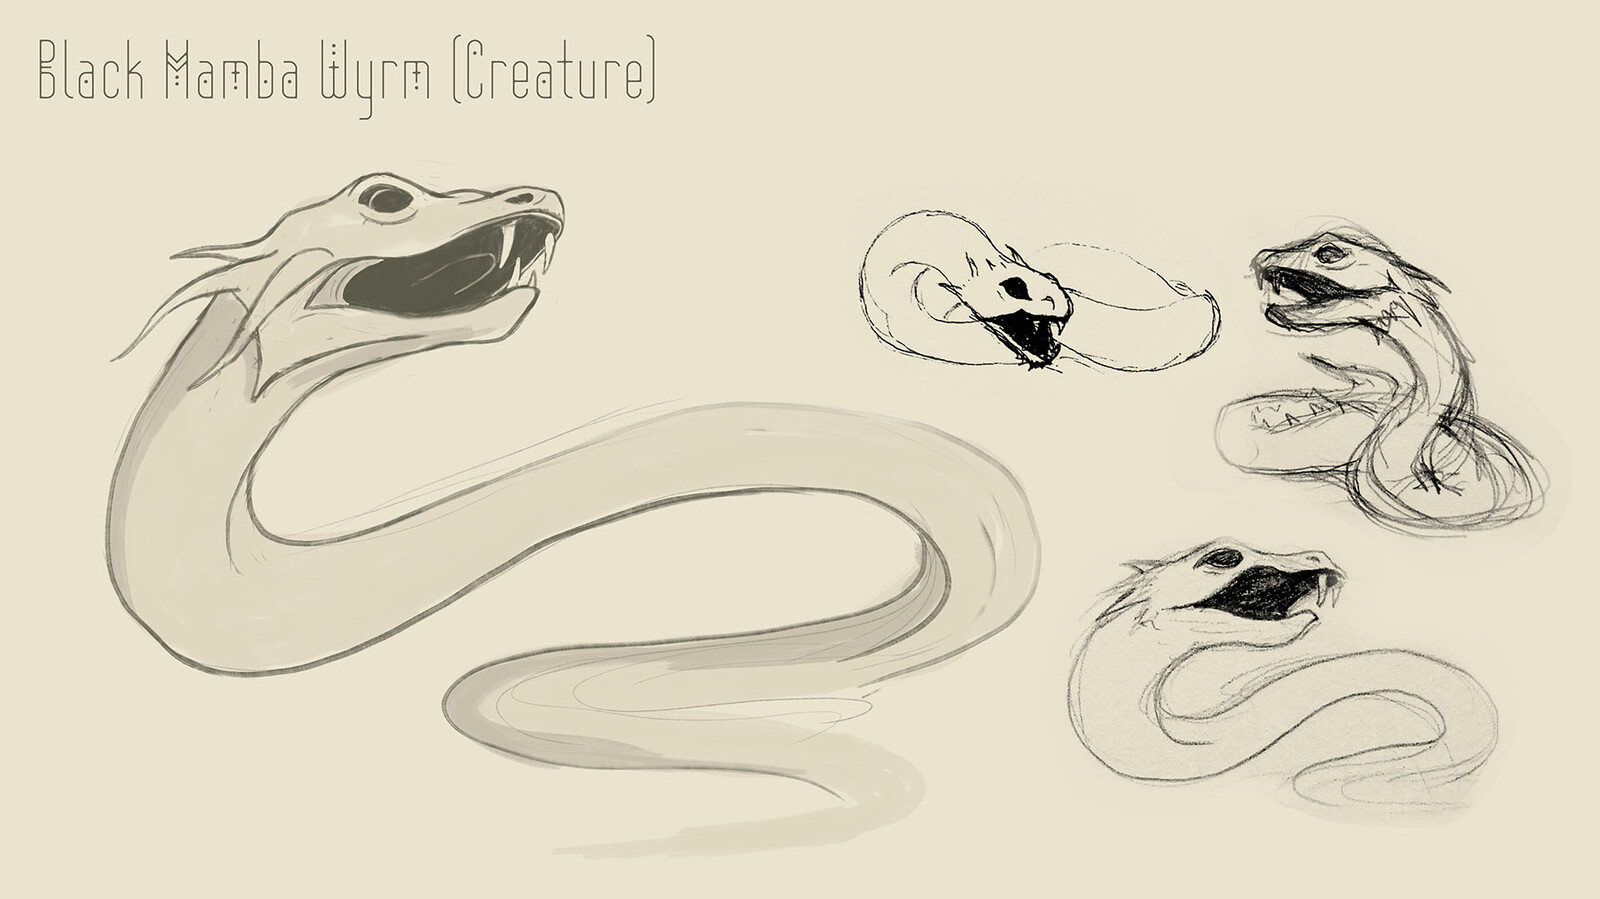 The Black Mamba Wyrm sketches and ideation.